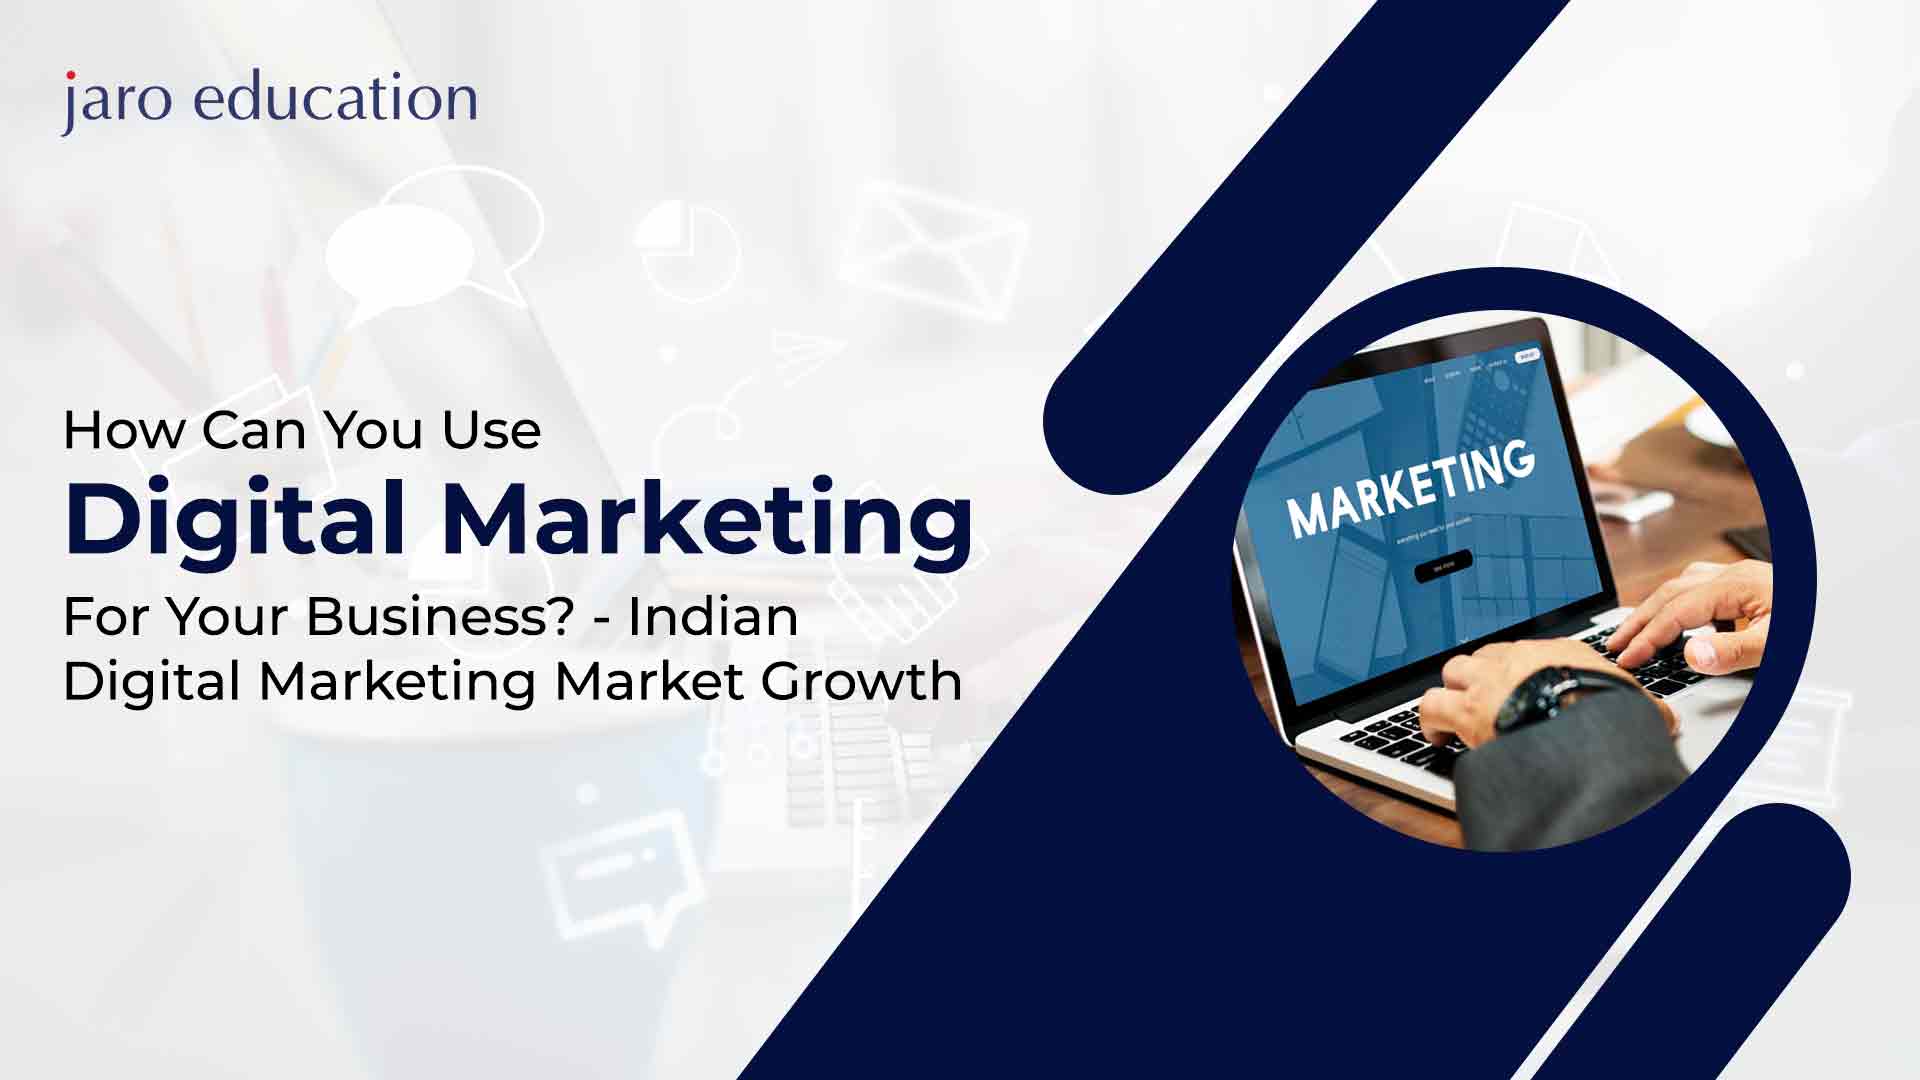 How Can You Use Digital Marketing For Your Business? - Indian Digital Marketing Market Growth BLog